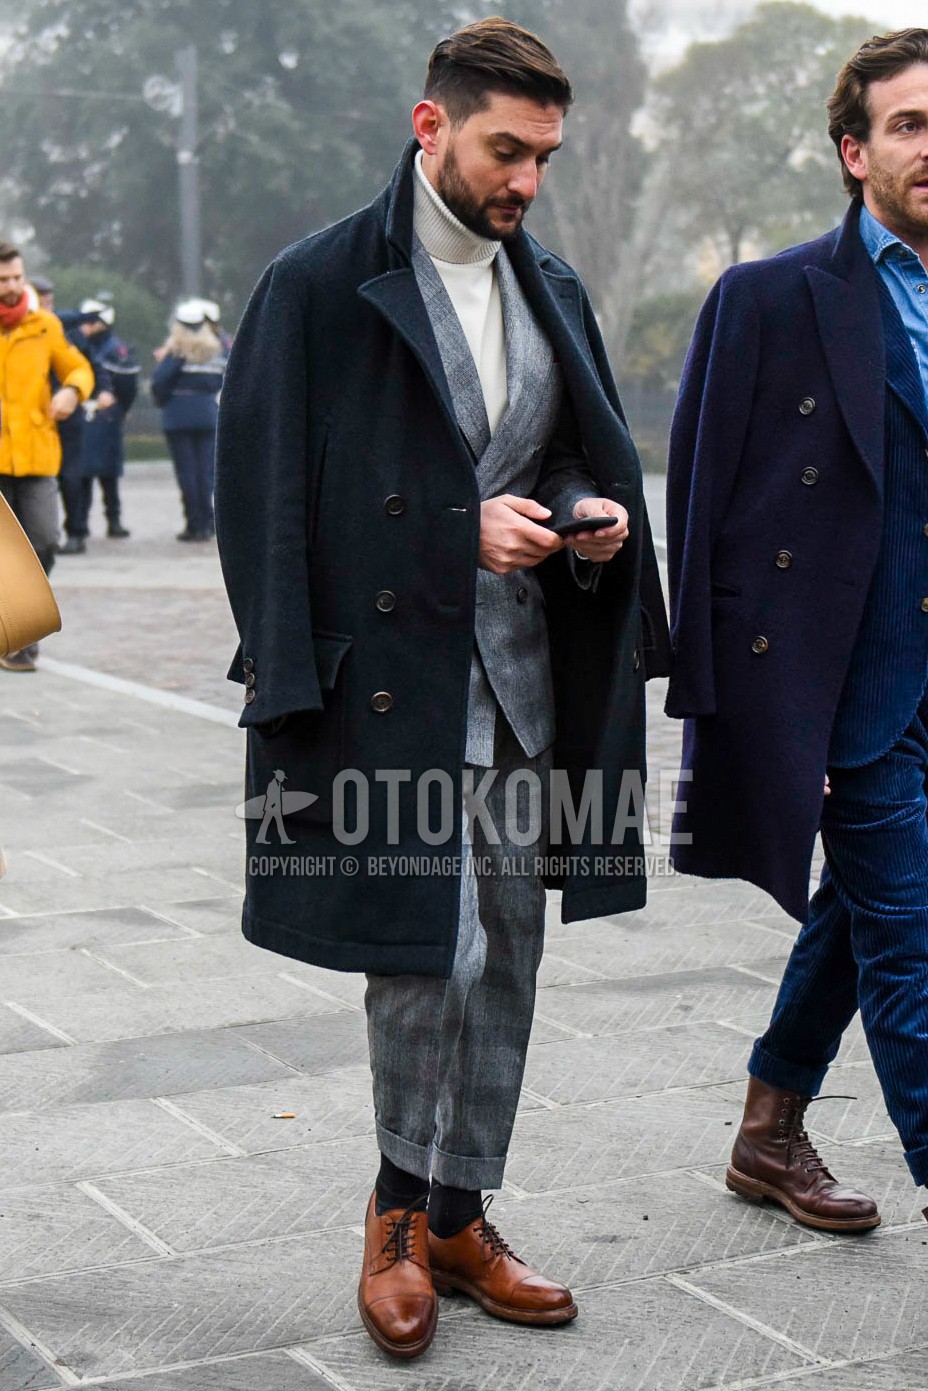 Men's winter outfit with black plain ulster coat, white plain turtleneck knit, dark gray plain socks, brown straight-tip shoes leather shoes, gray check suit.